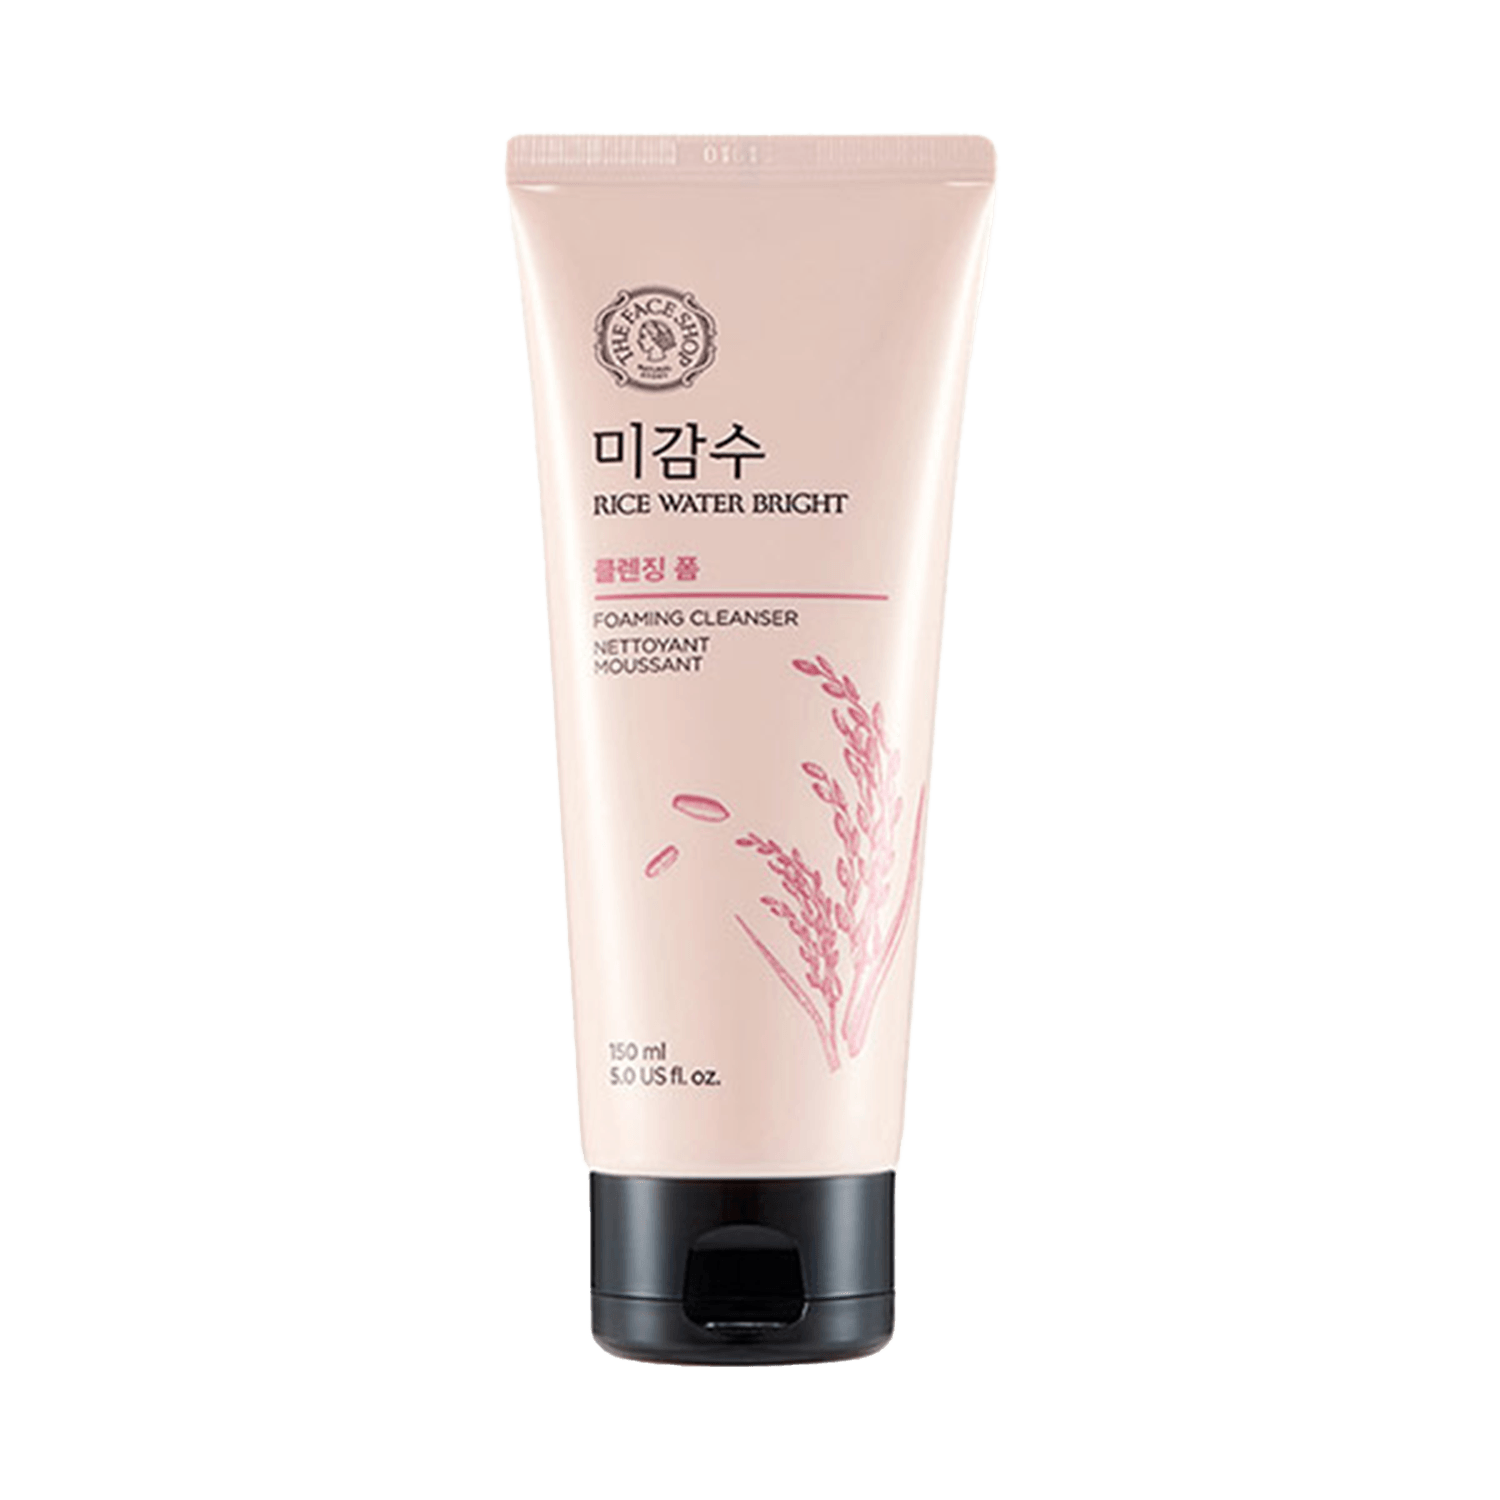 The Face Shop | The Face Shop Rice Water Bright Foaming Cleanser (150ml)